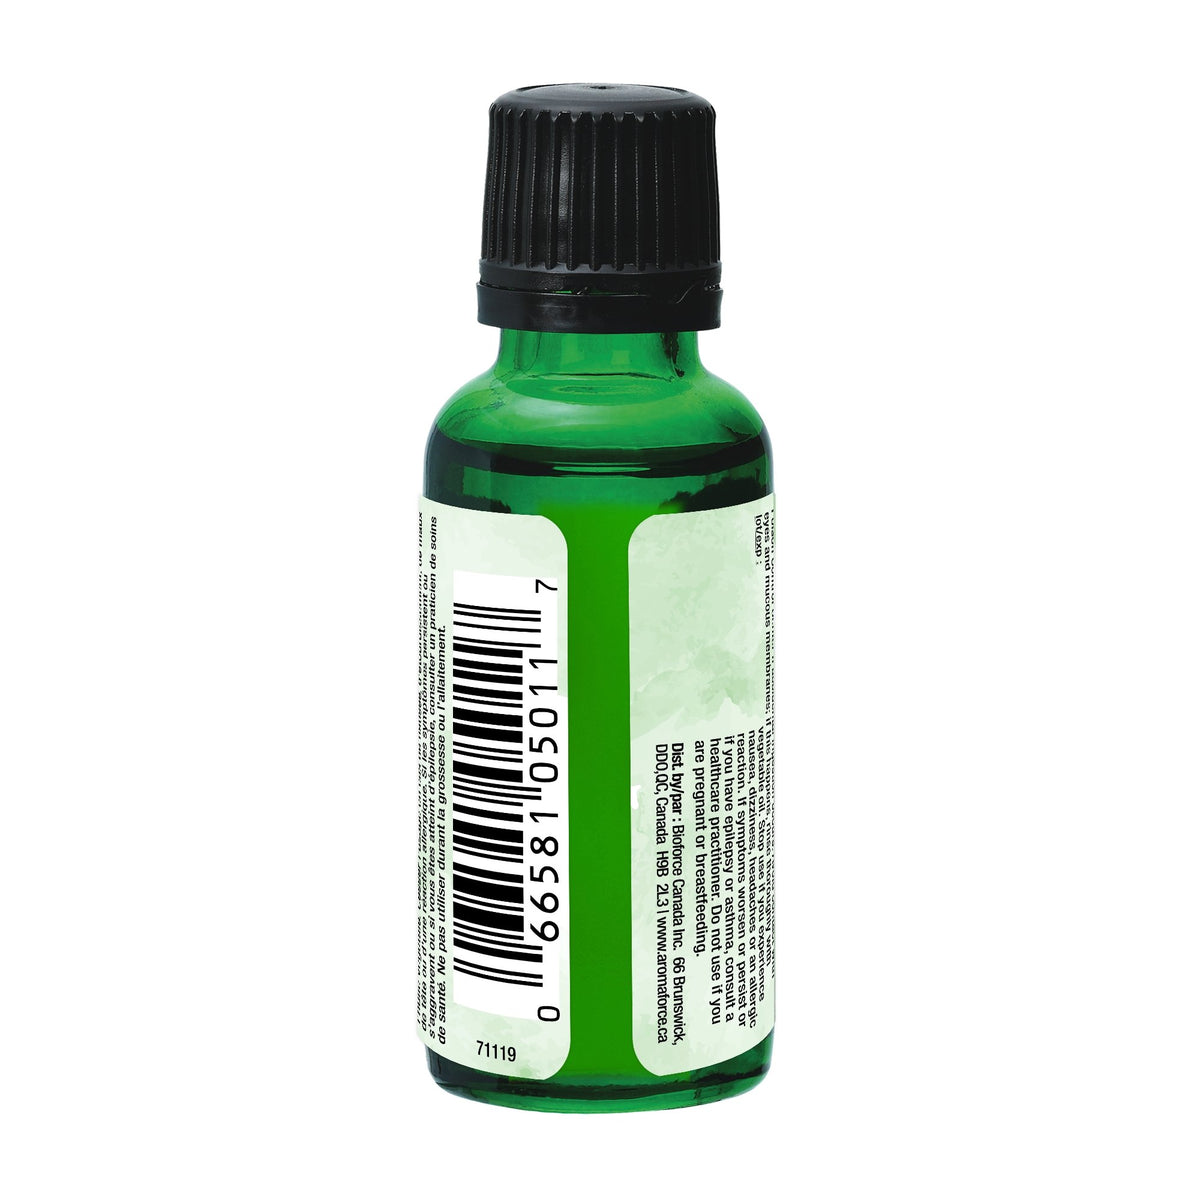 Eucalyptus Essential Oil 100% pure and natural 30mL - Aromaforce